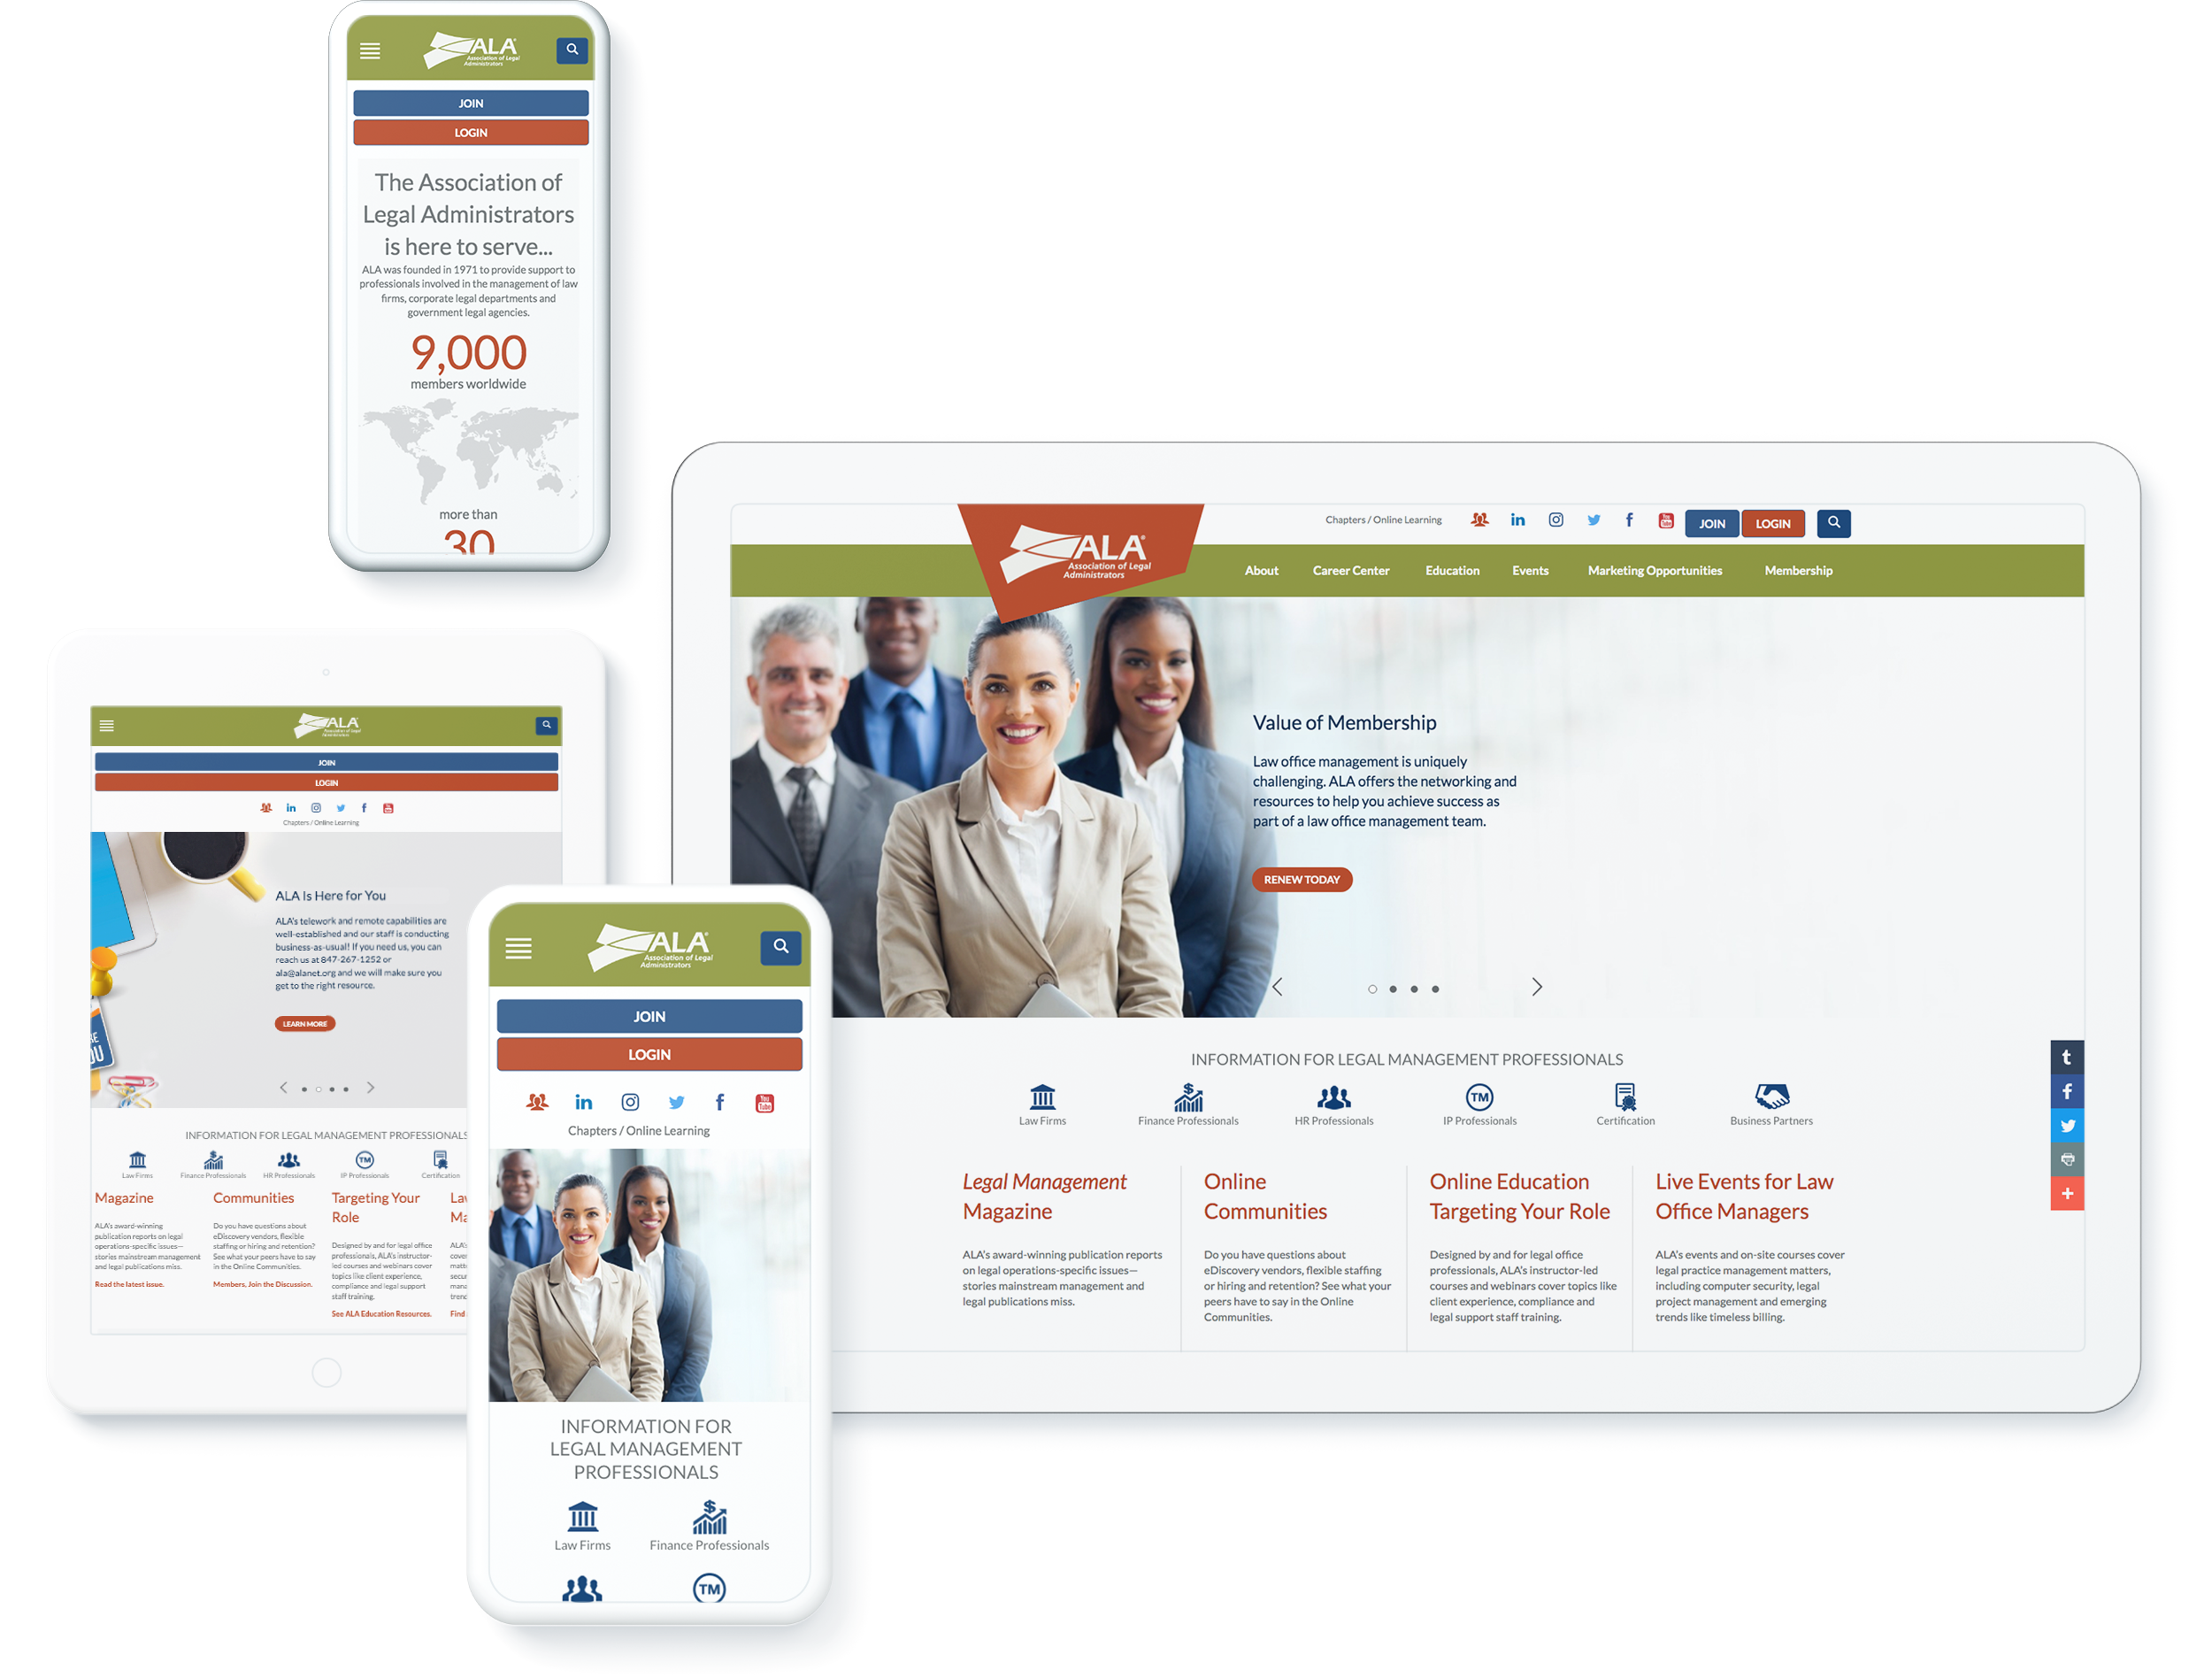 Display of the Association of Legal Administrators' website across different devices highlighting membership benefits and resources for legal management professionals.